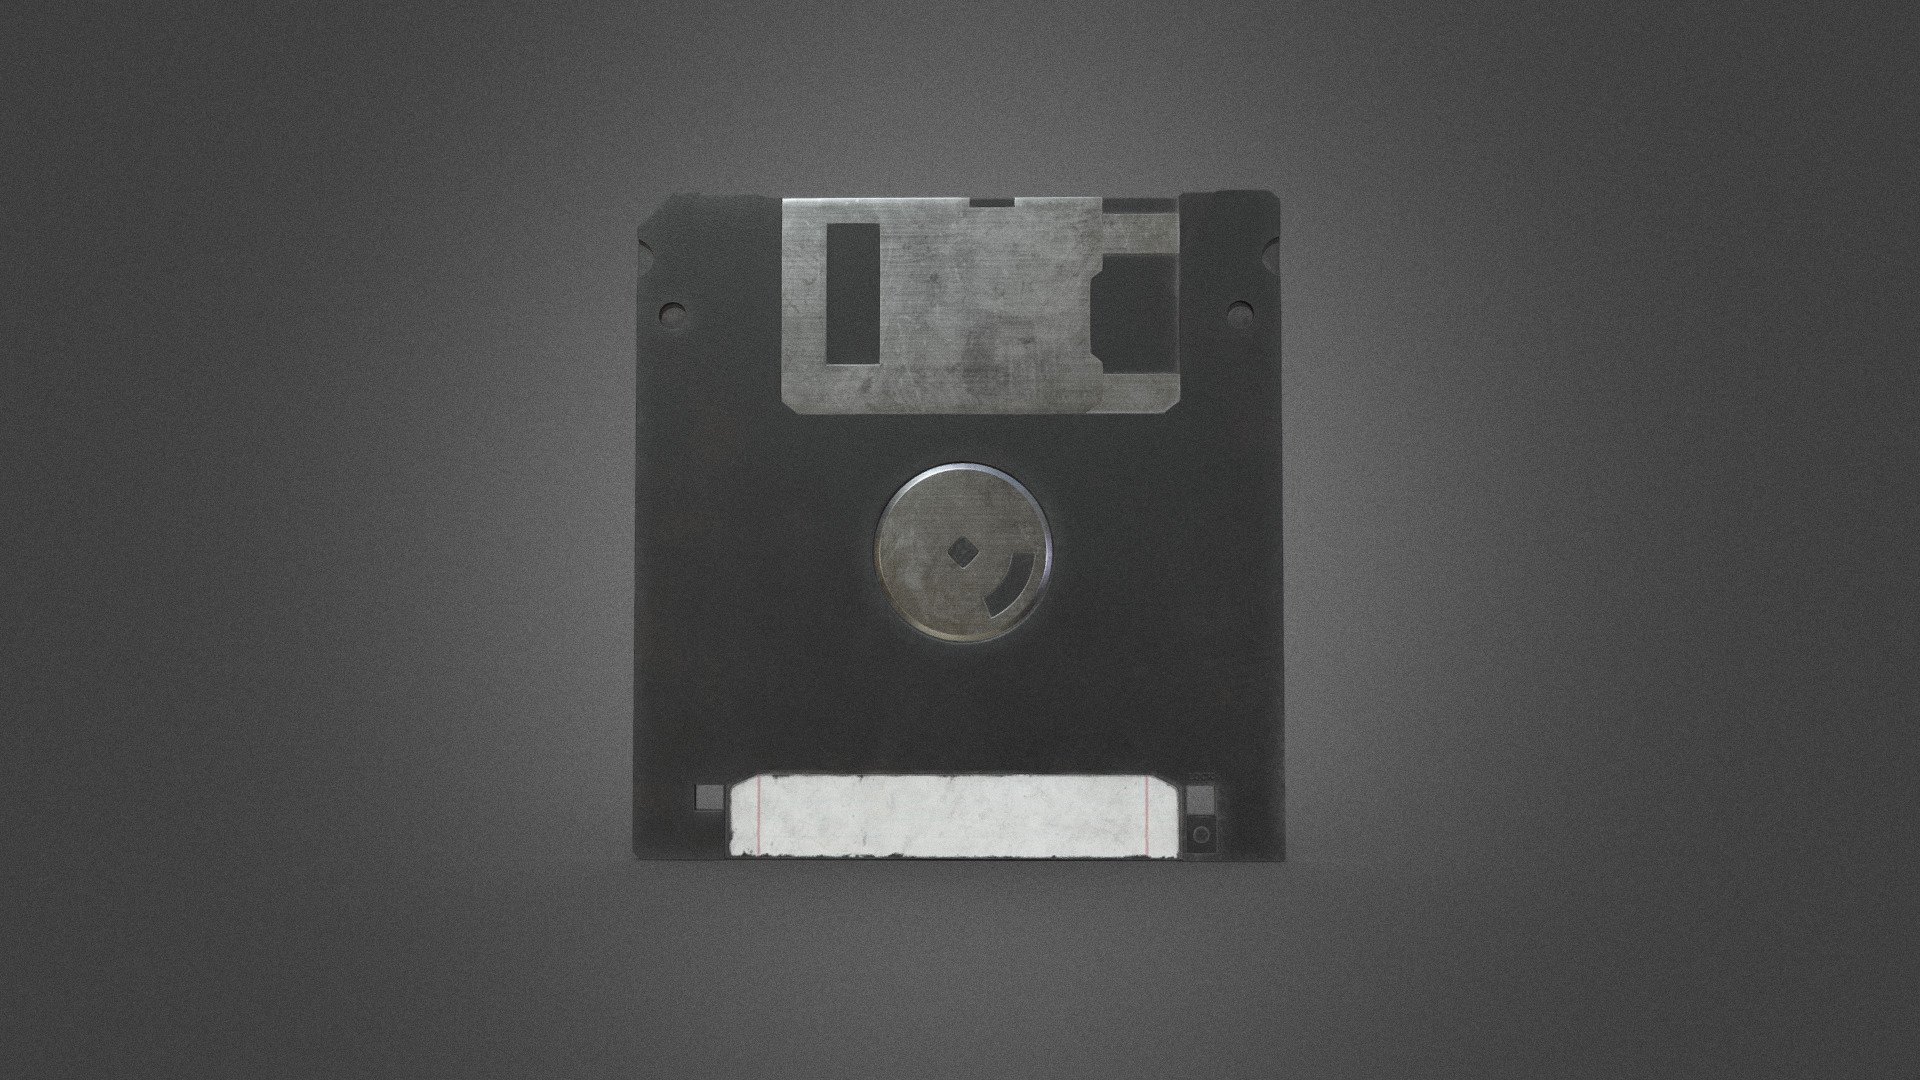 High quality model of a floppy disk.

Formats included :
.FBX
.OBJ

Included UV 4096x4096 (baseColor - metallic - normal - roughness - opacity) 3d model